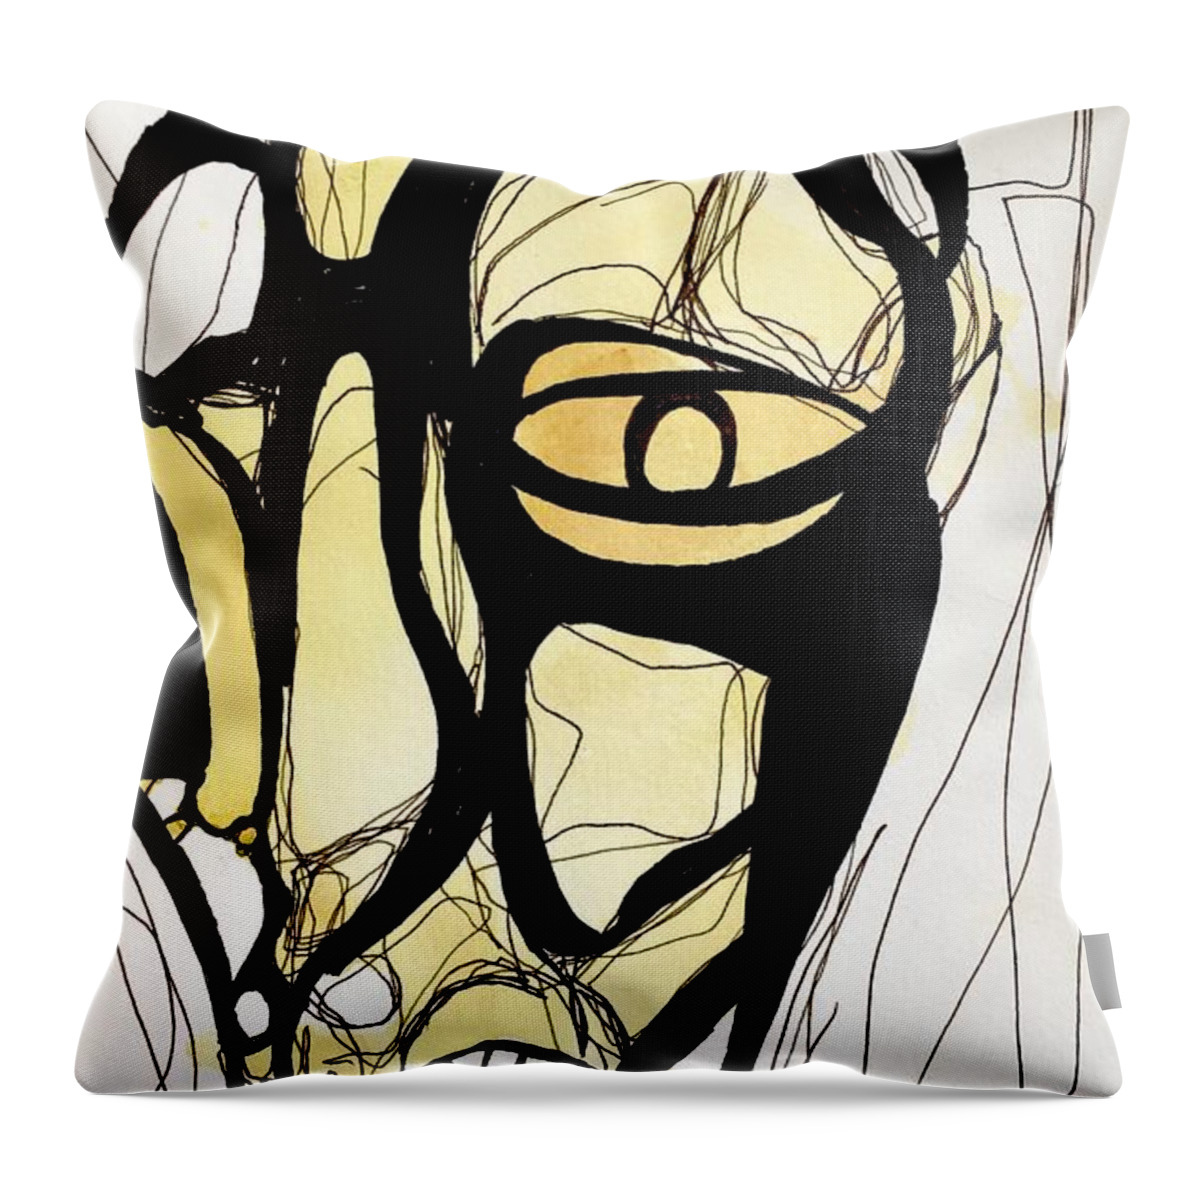 Modern Art Throw Pillow featuring the drawing Untitled 14 by Jeremiah Ray